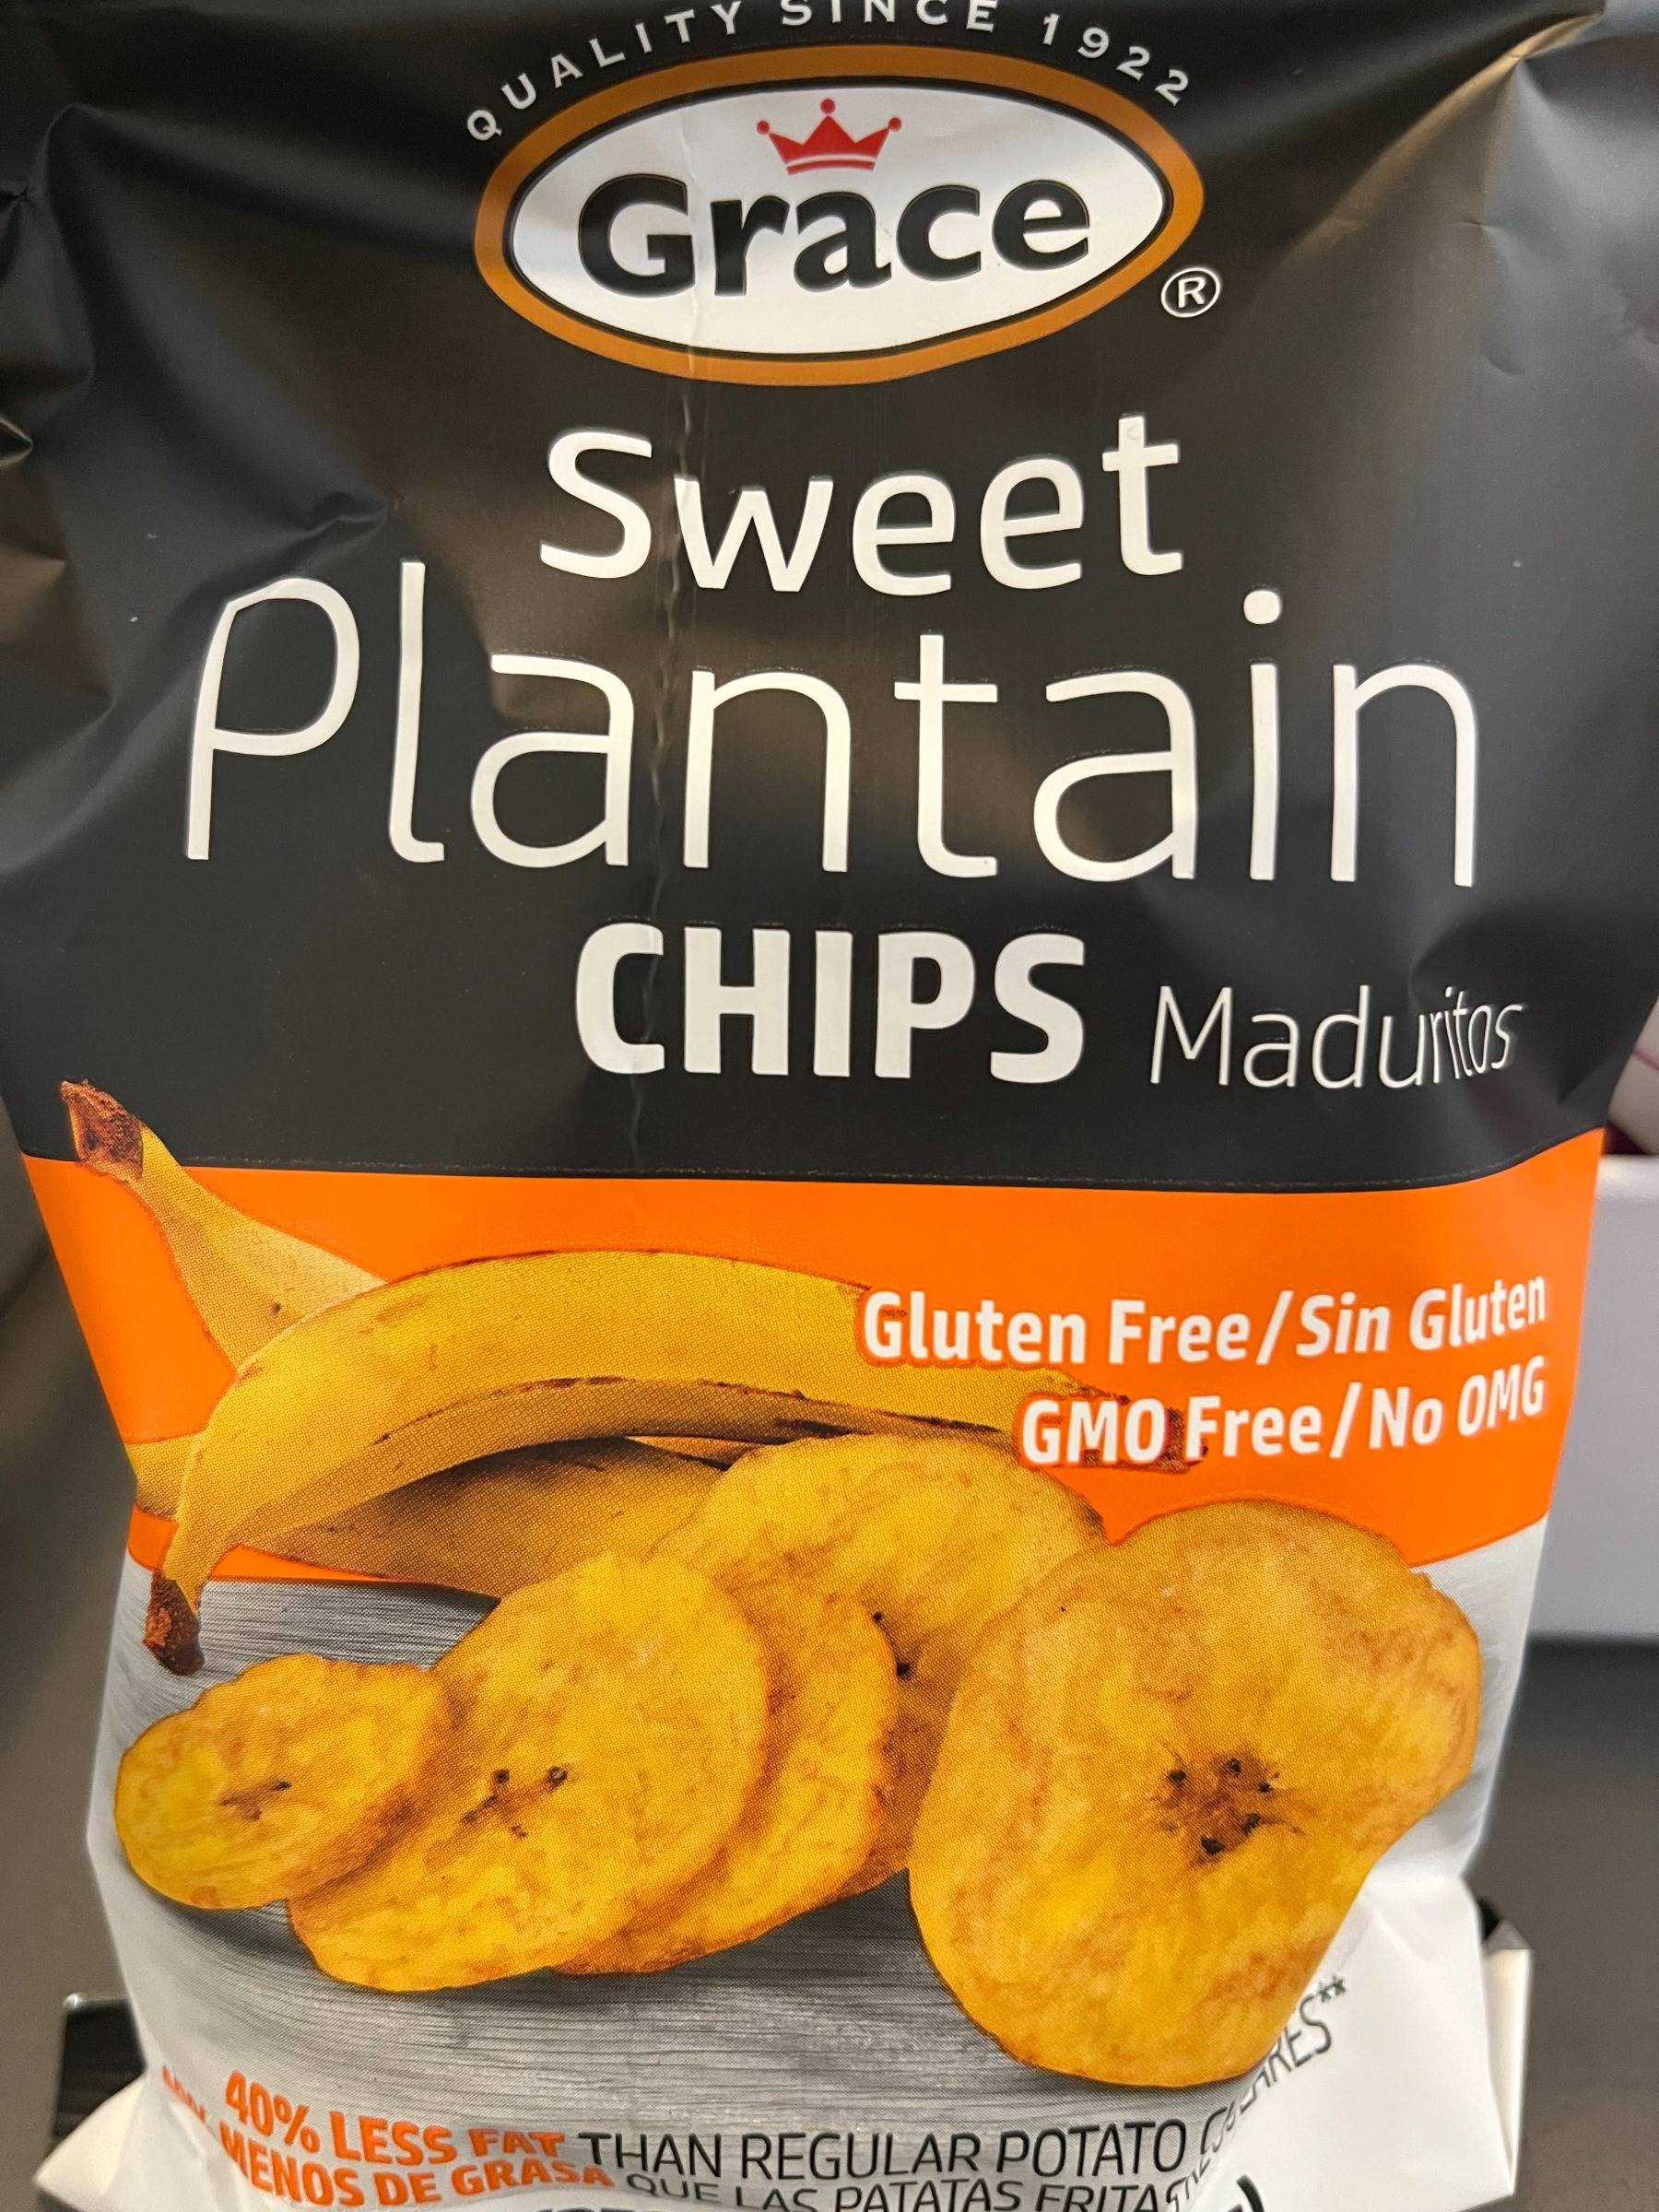 PLANTAIN CHIPS